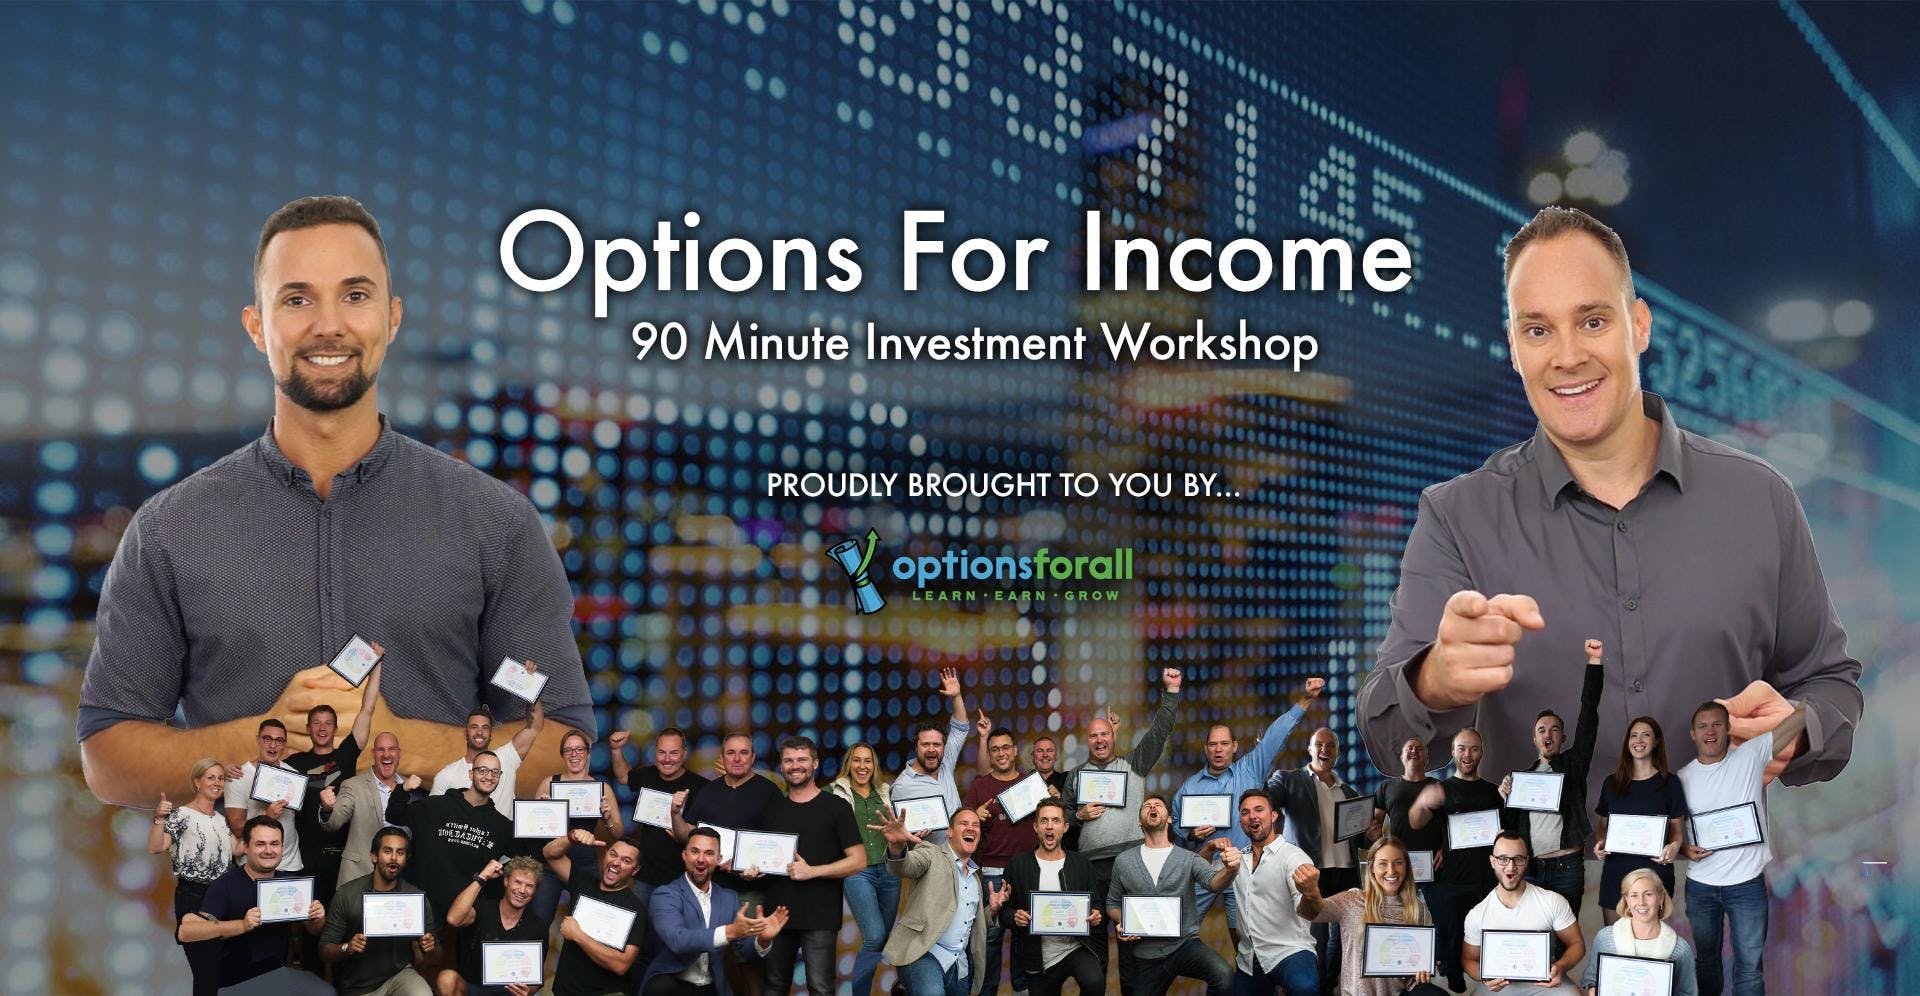 Options For Income - 90 Minute Investment Workshop